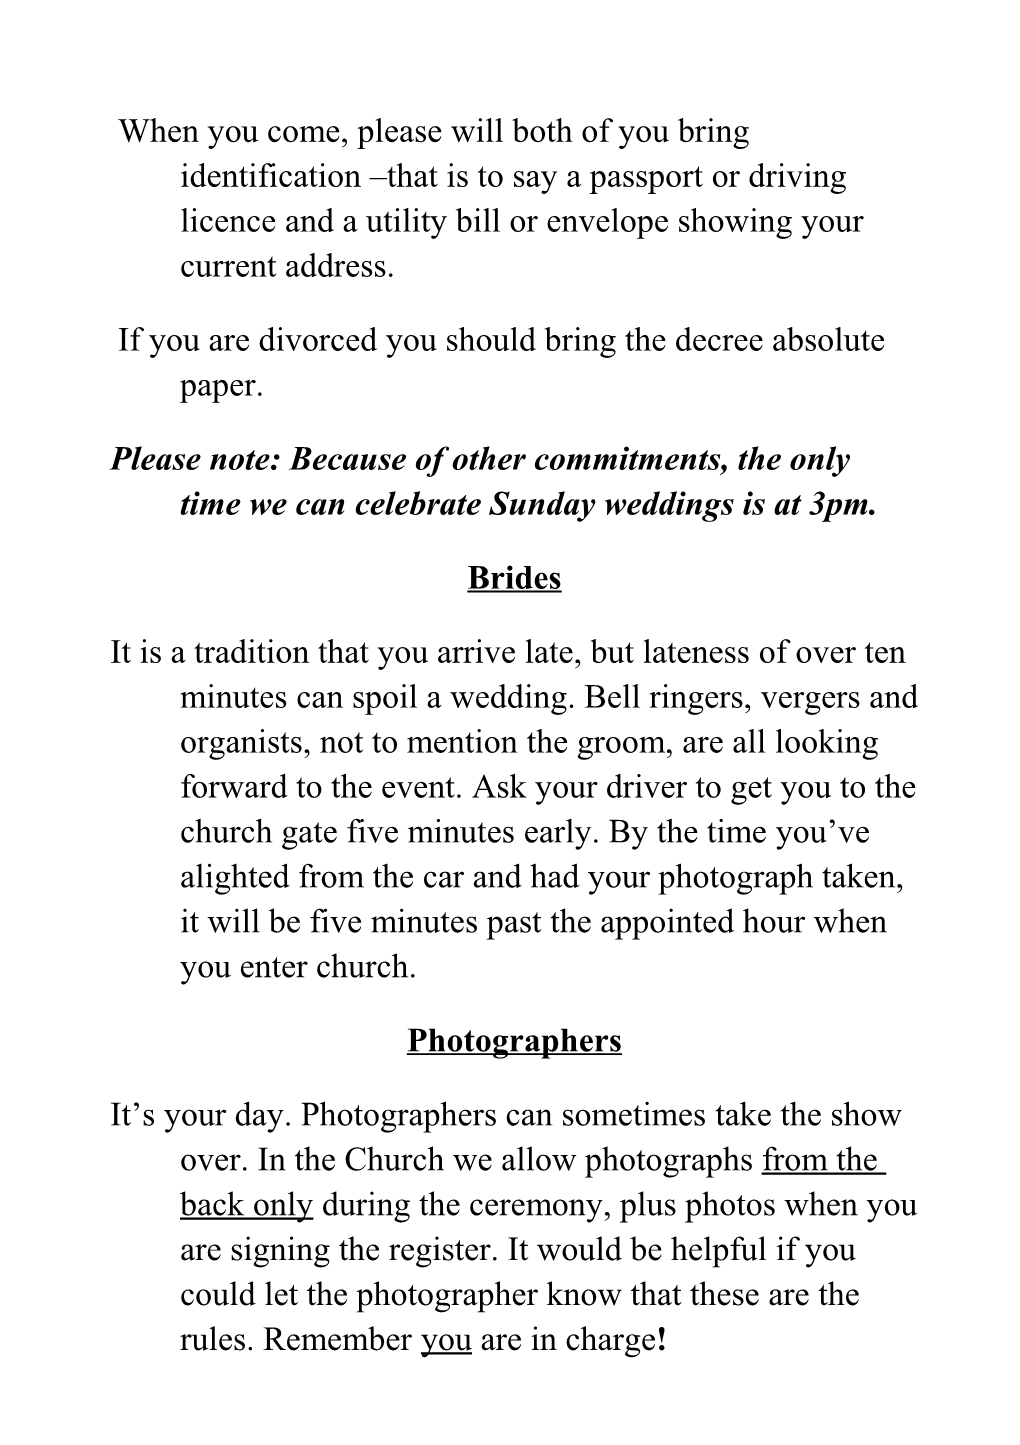 Information for Couples Intending to Be Married